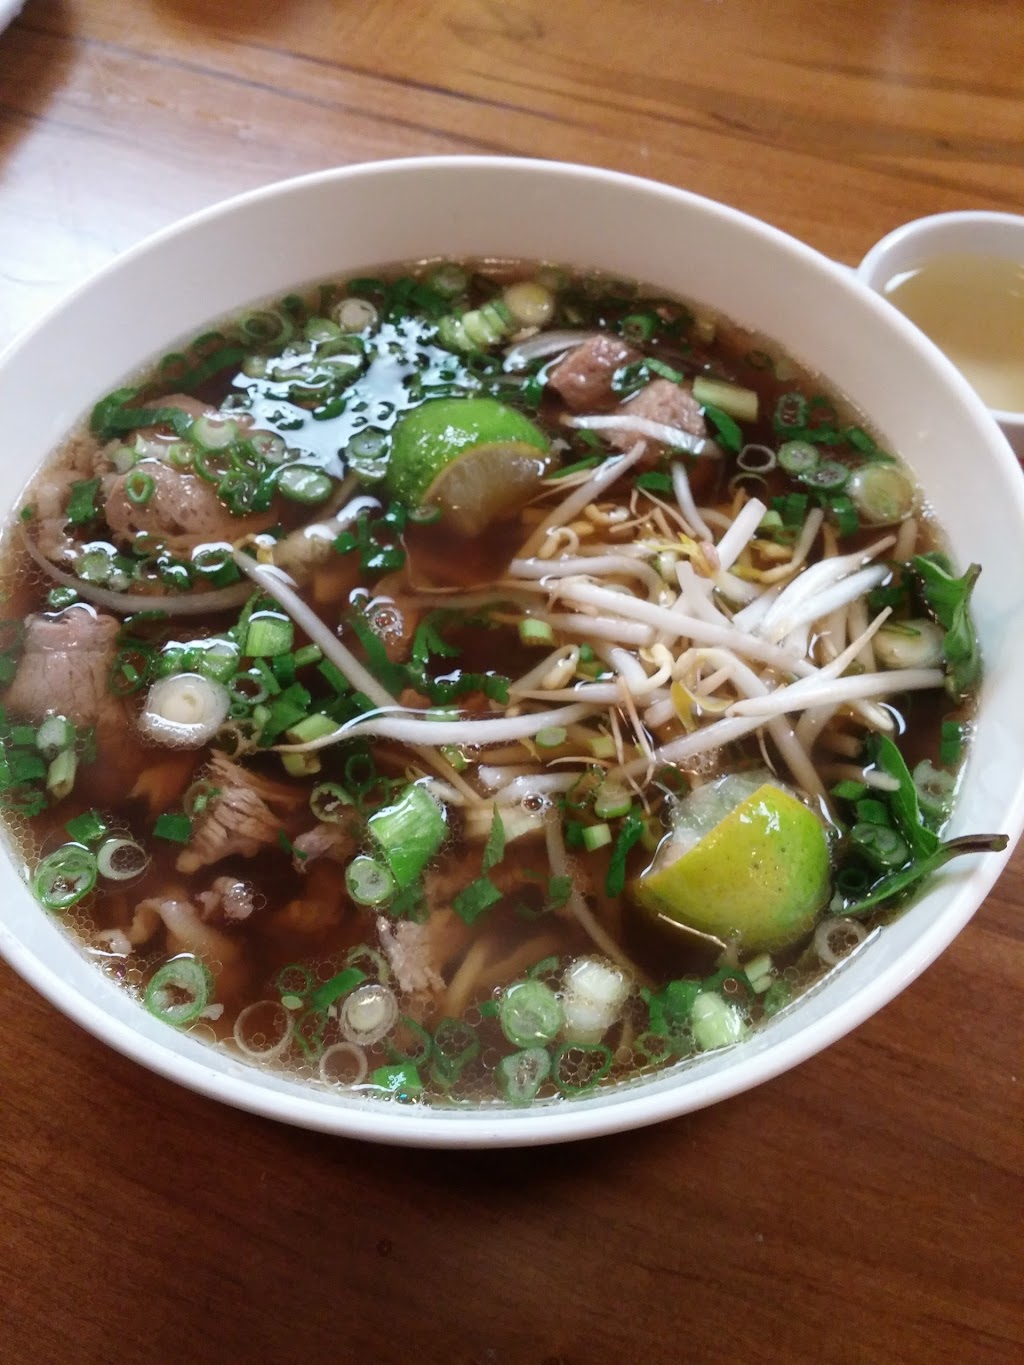 Pho King | restaurant | 9103 118 Ave NW, Edmonton, AB T5B 0T9, Canada | 7807577277 OR +1 780-757-7277